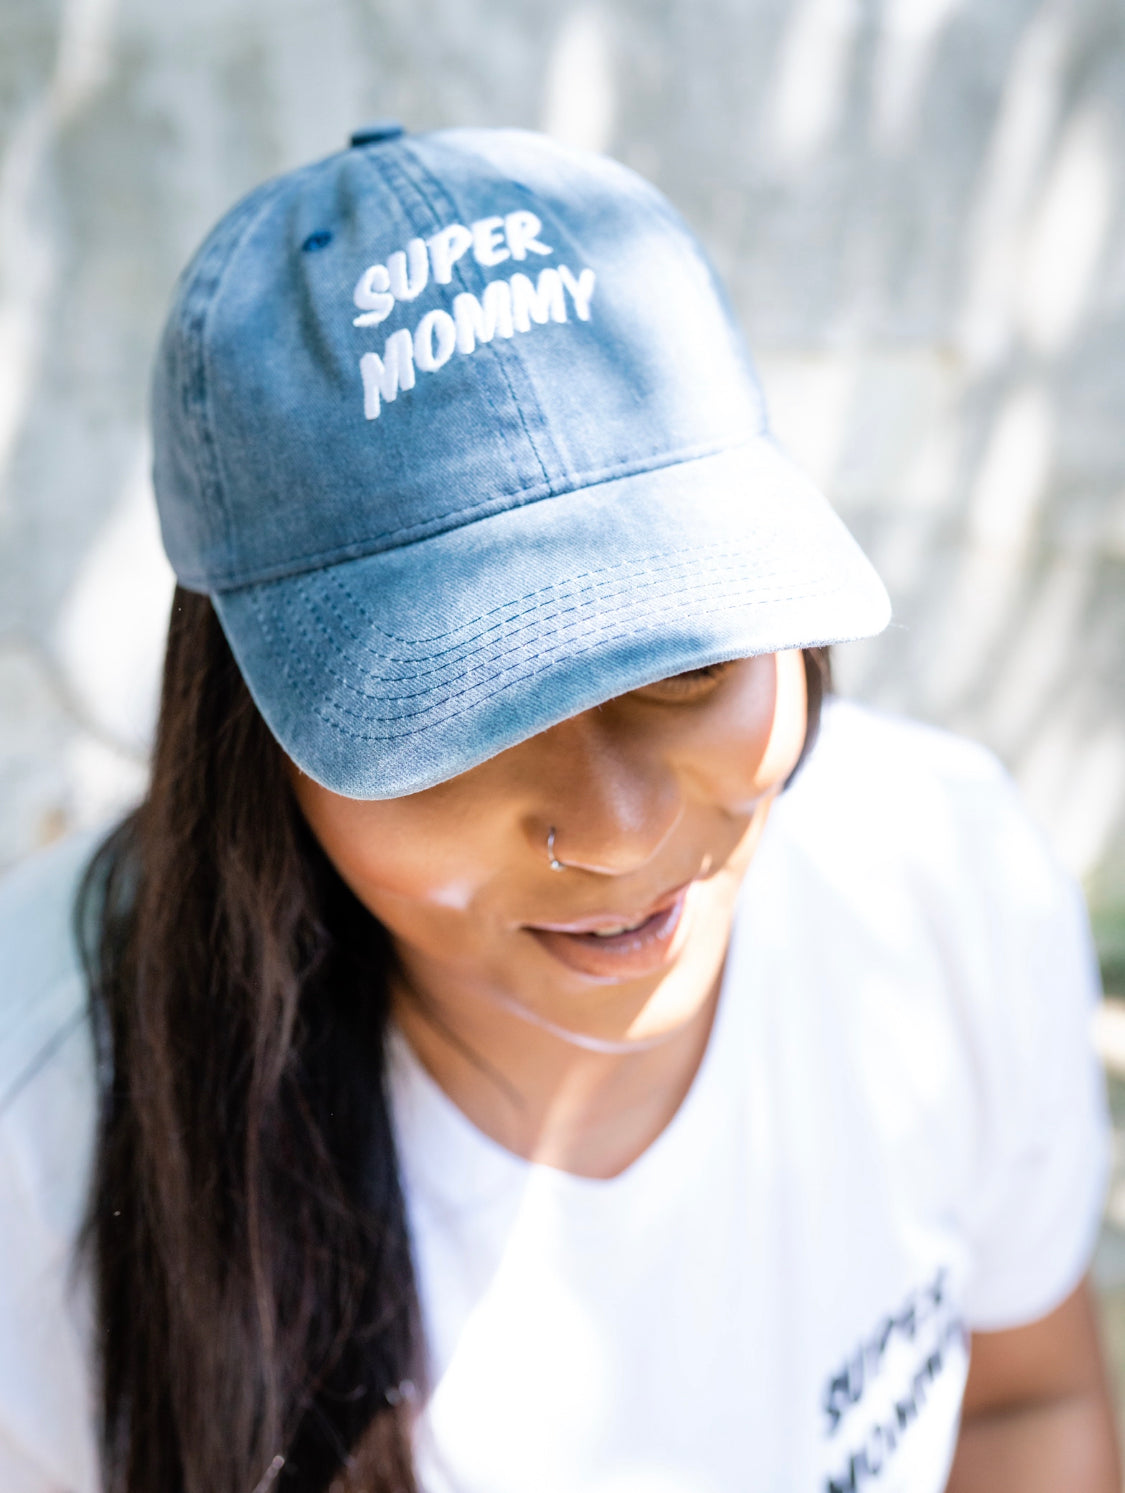 Super Mommy Hat - Blue Adult Size